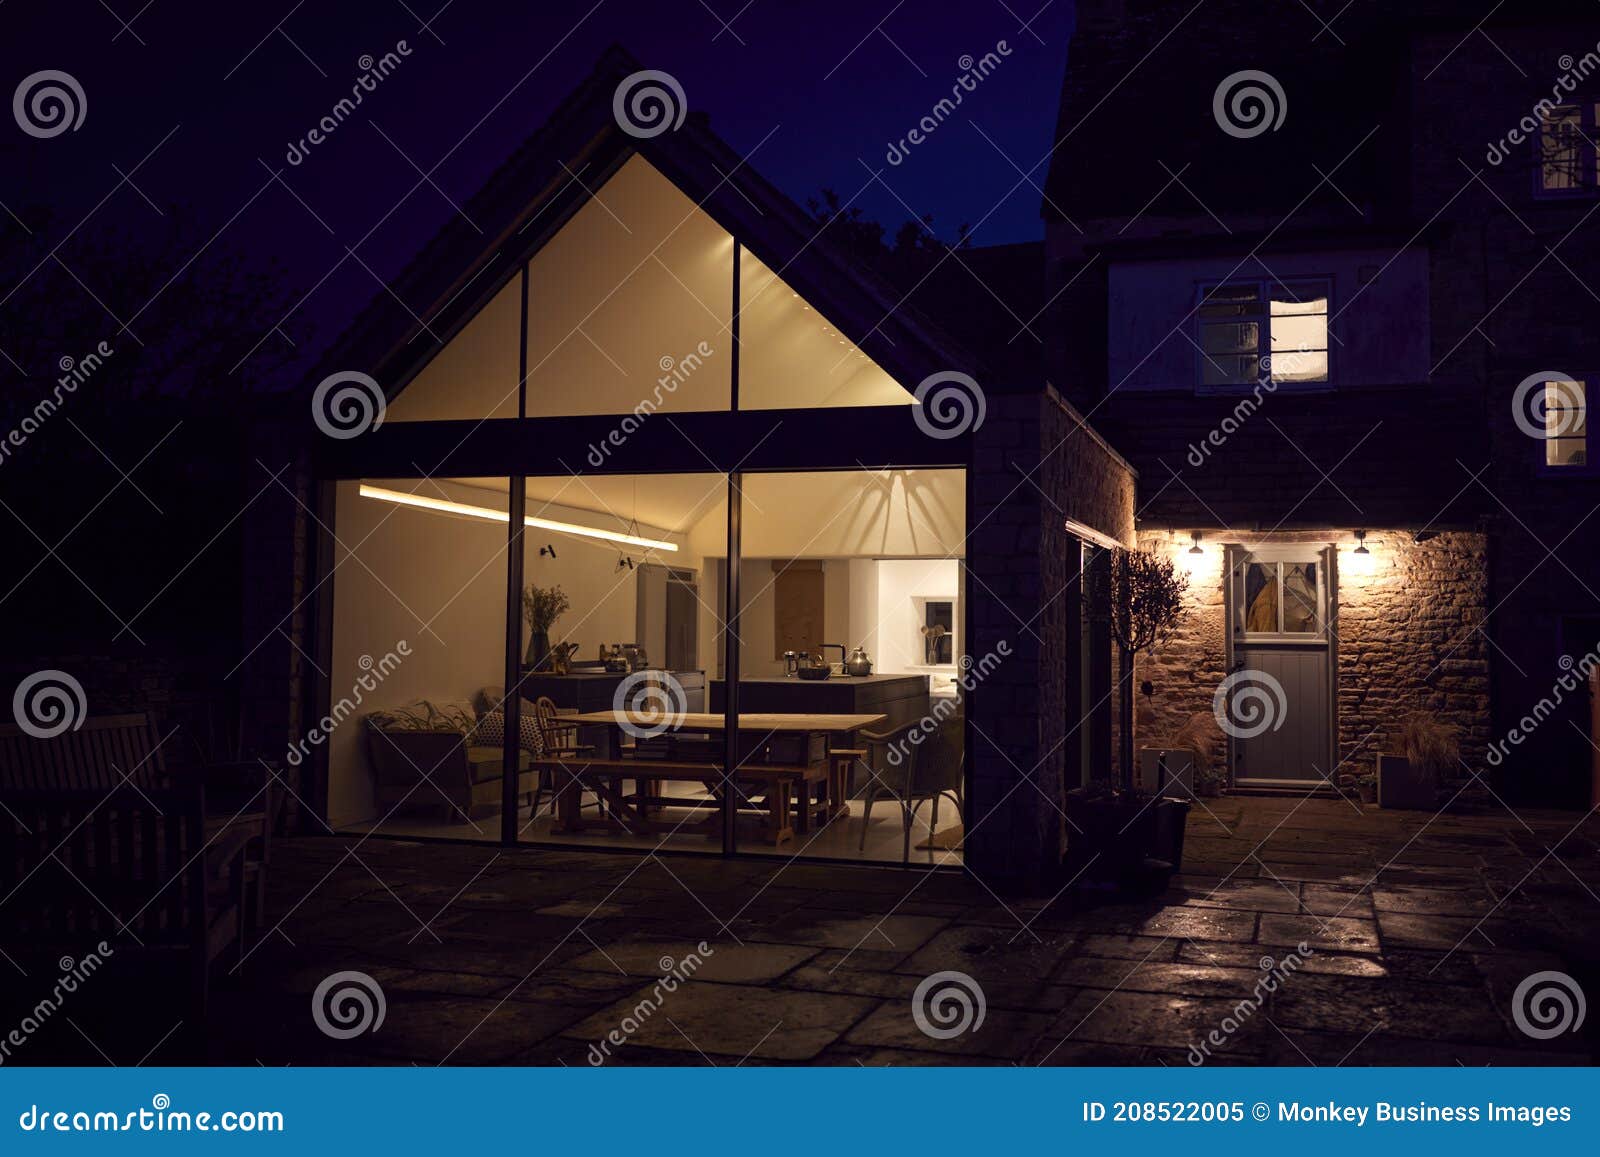 exterior view of beautiful kitchen extension at night